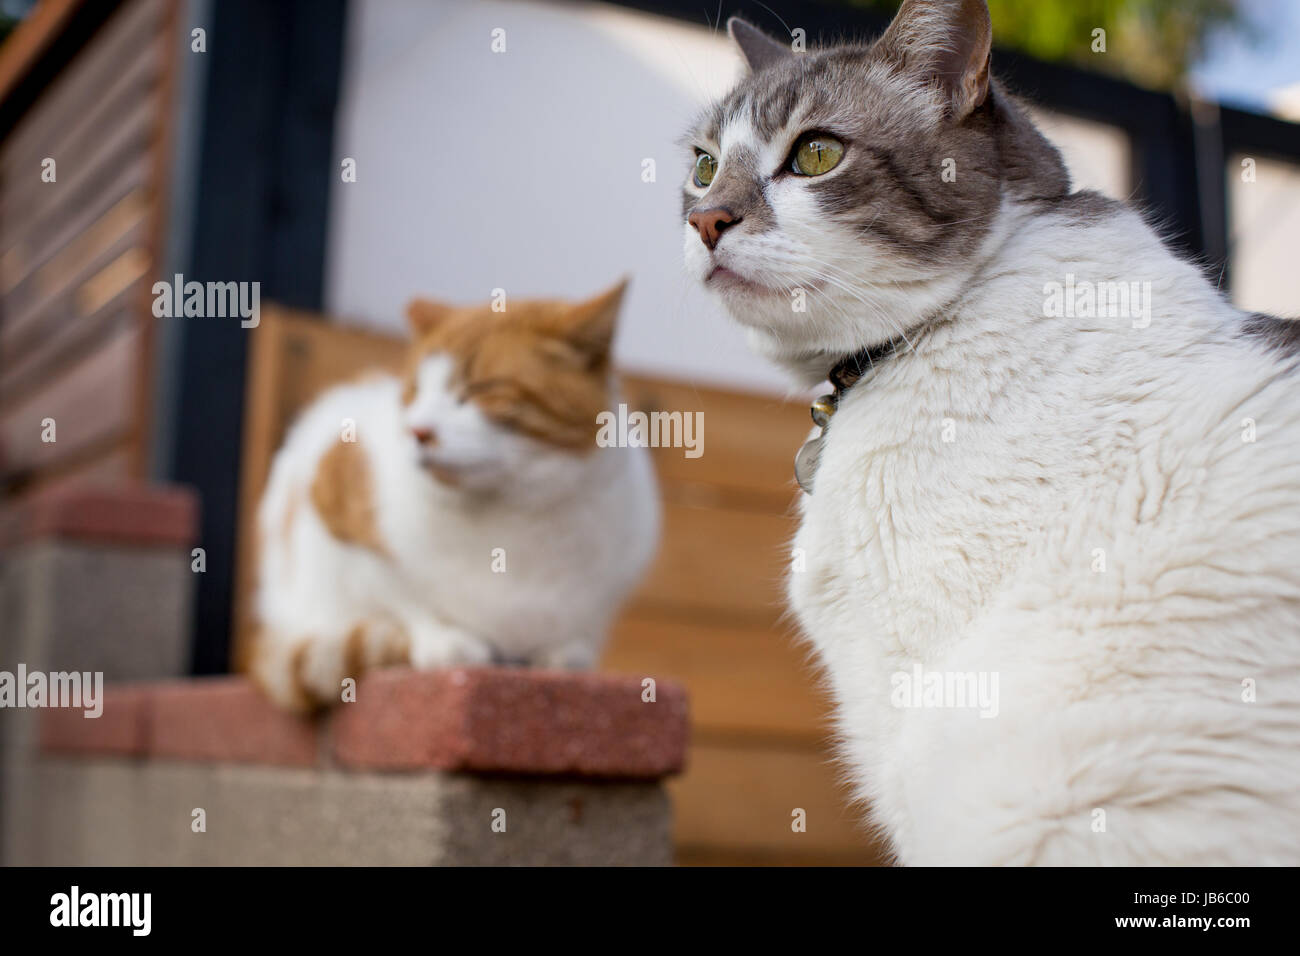 Two  cats in a residential neighborhood setting; one looking off, the other relaxing in the background with eyes closed. Stock Photo